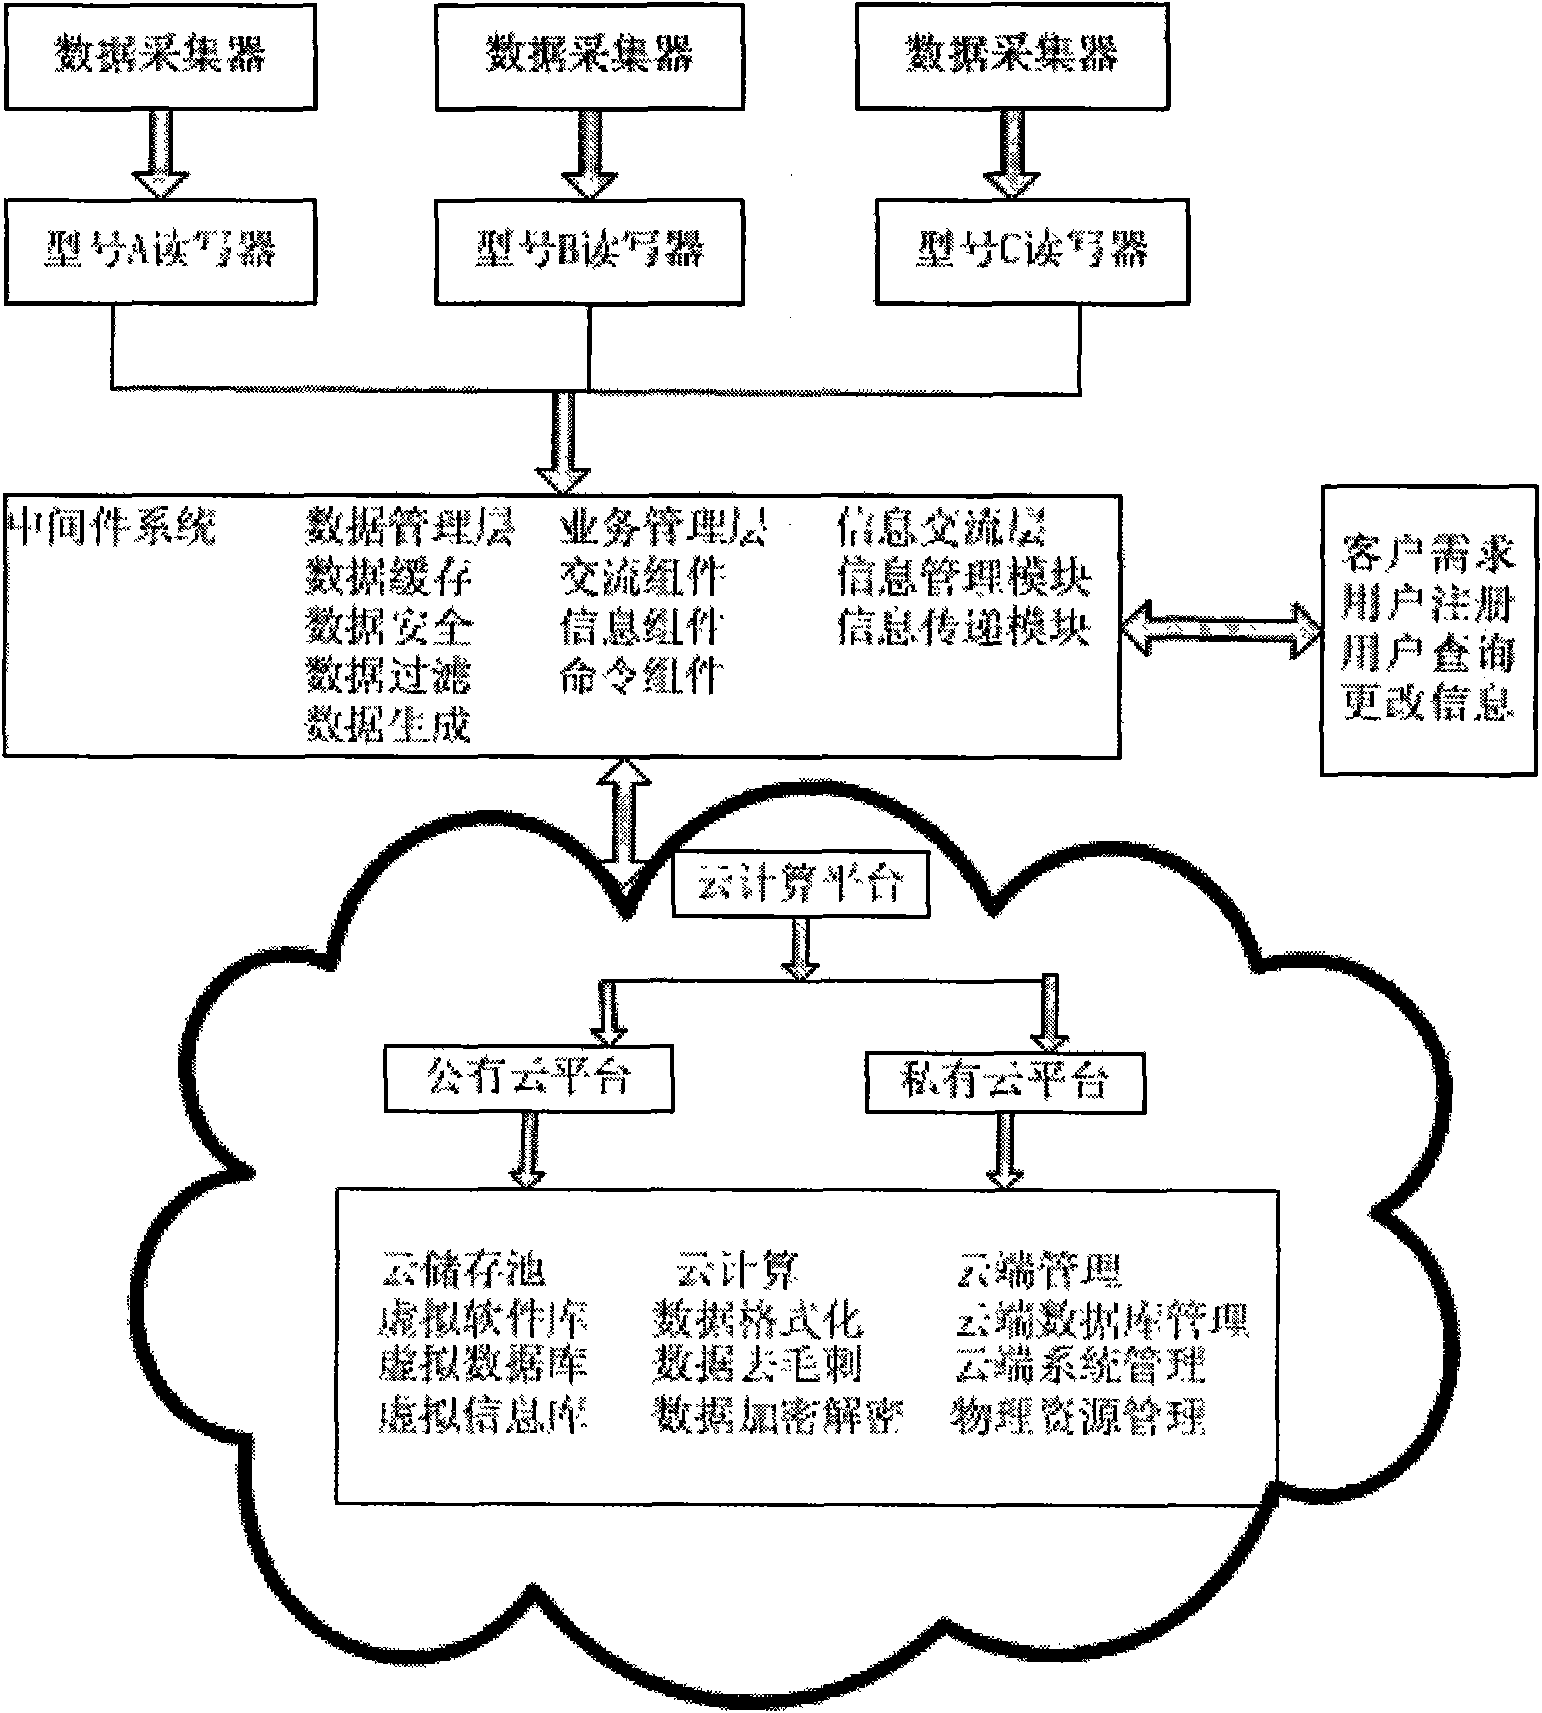 Ship network construction method based on radio frequency identification and cloud computing